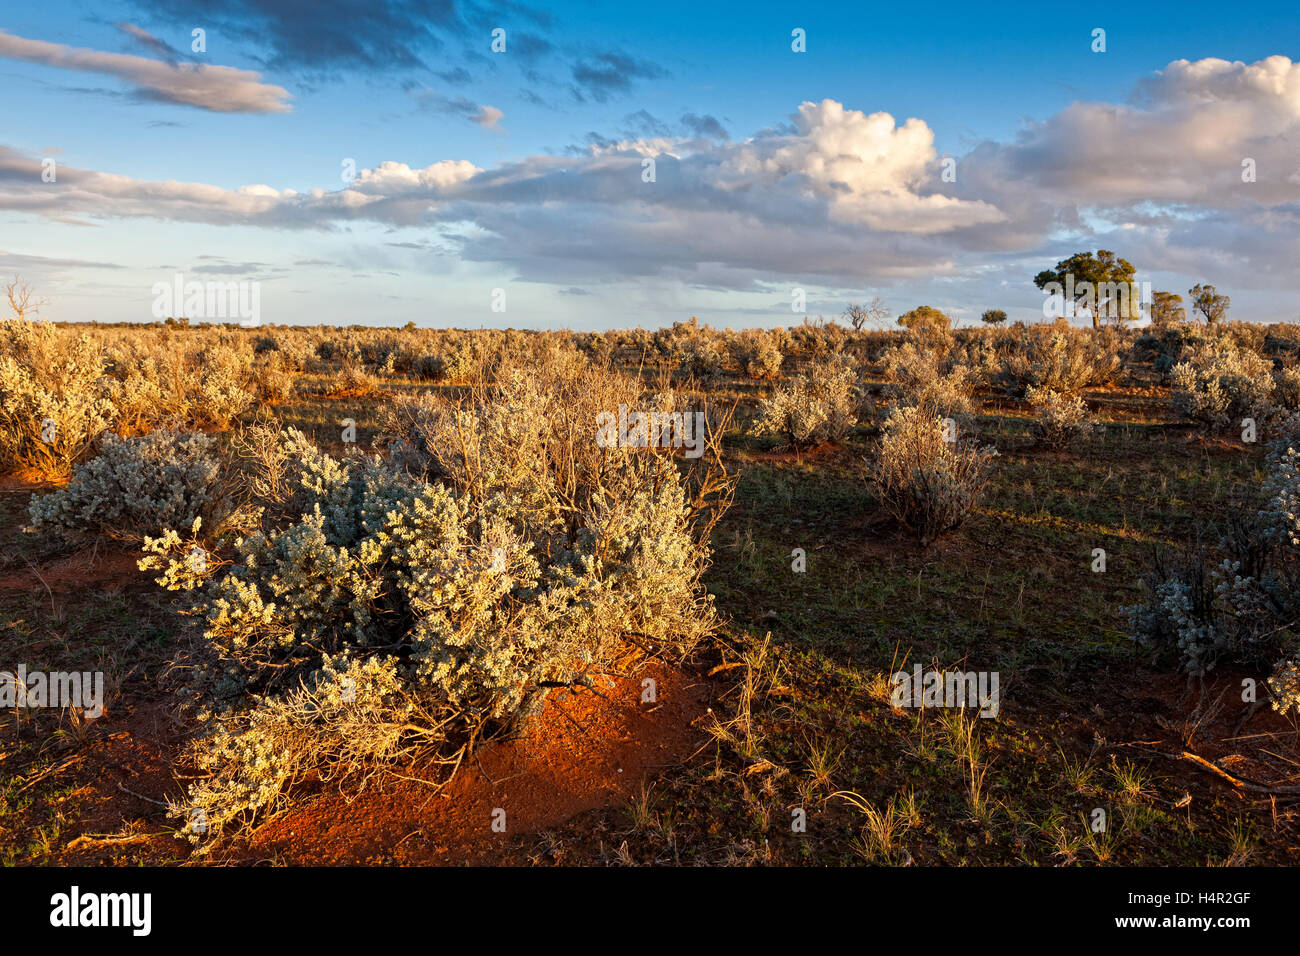 Tough drought resistant plants inhabit much of the semi arid grazing land around Burra in South Australia. Stock Photo